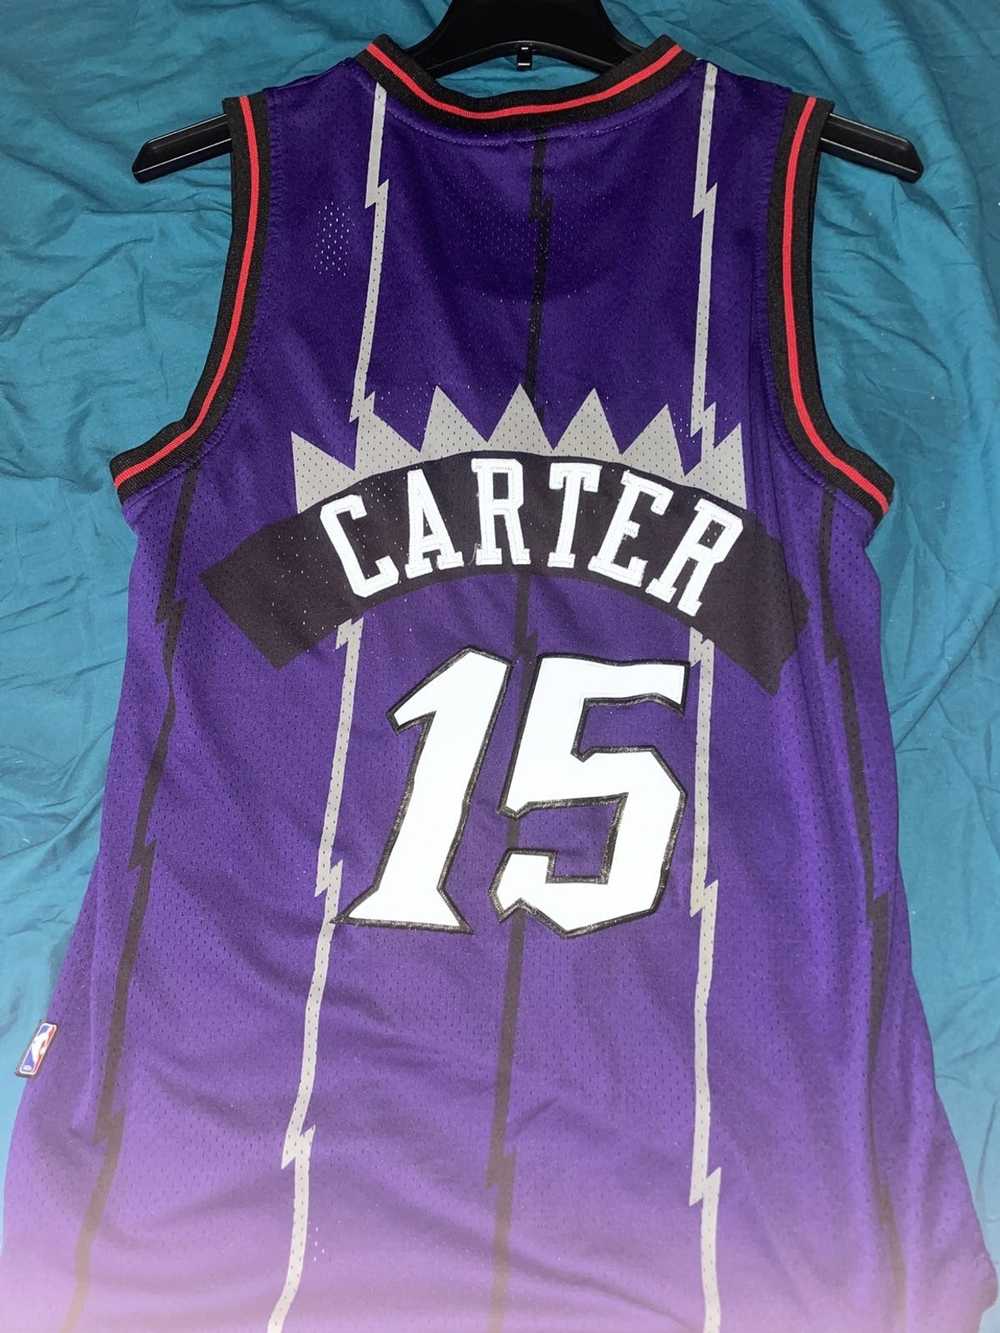 Thrifted Vince Carter NBA Jersey - image 2